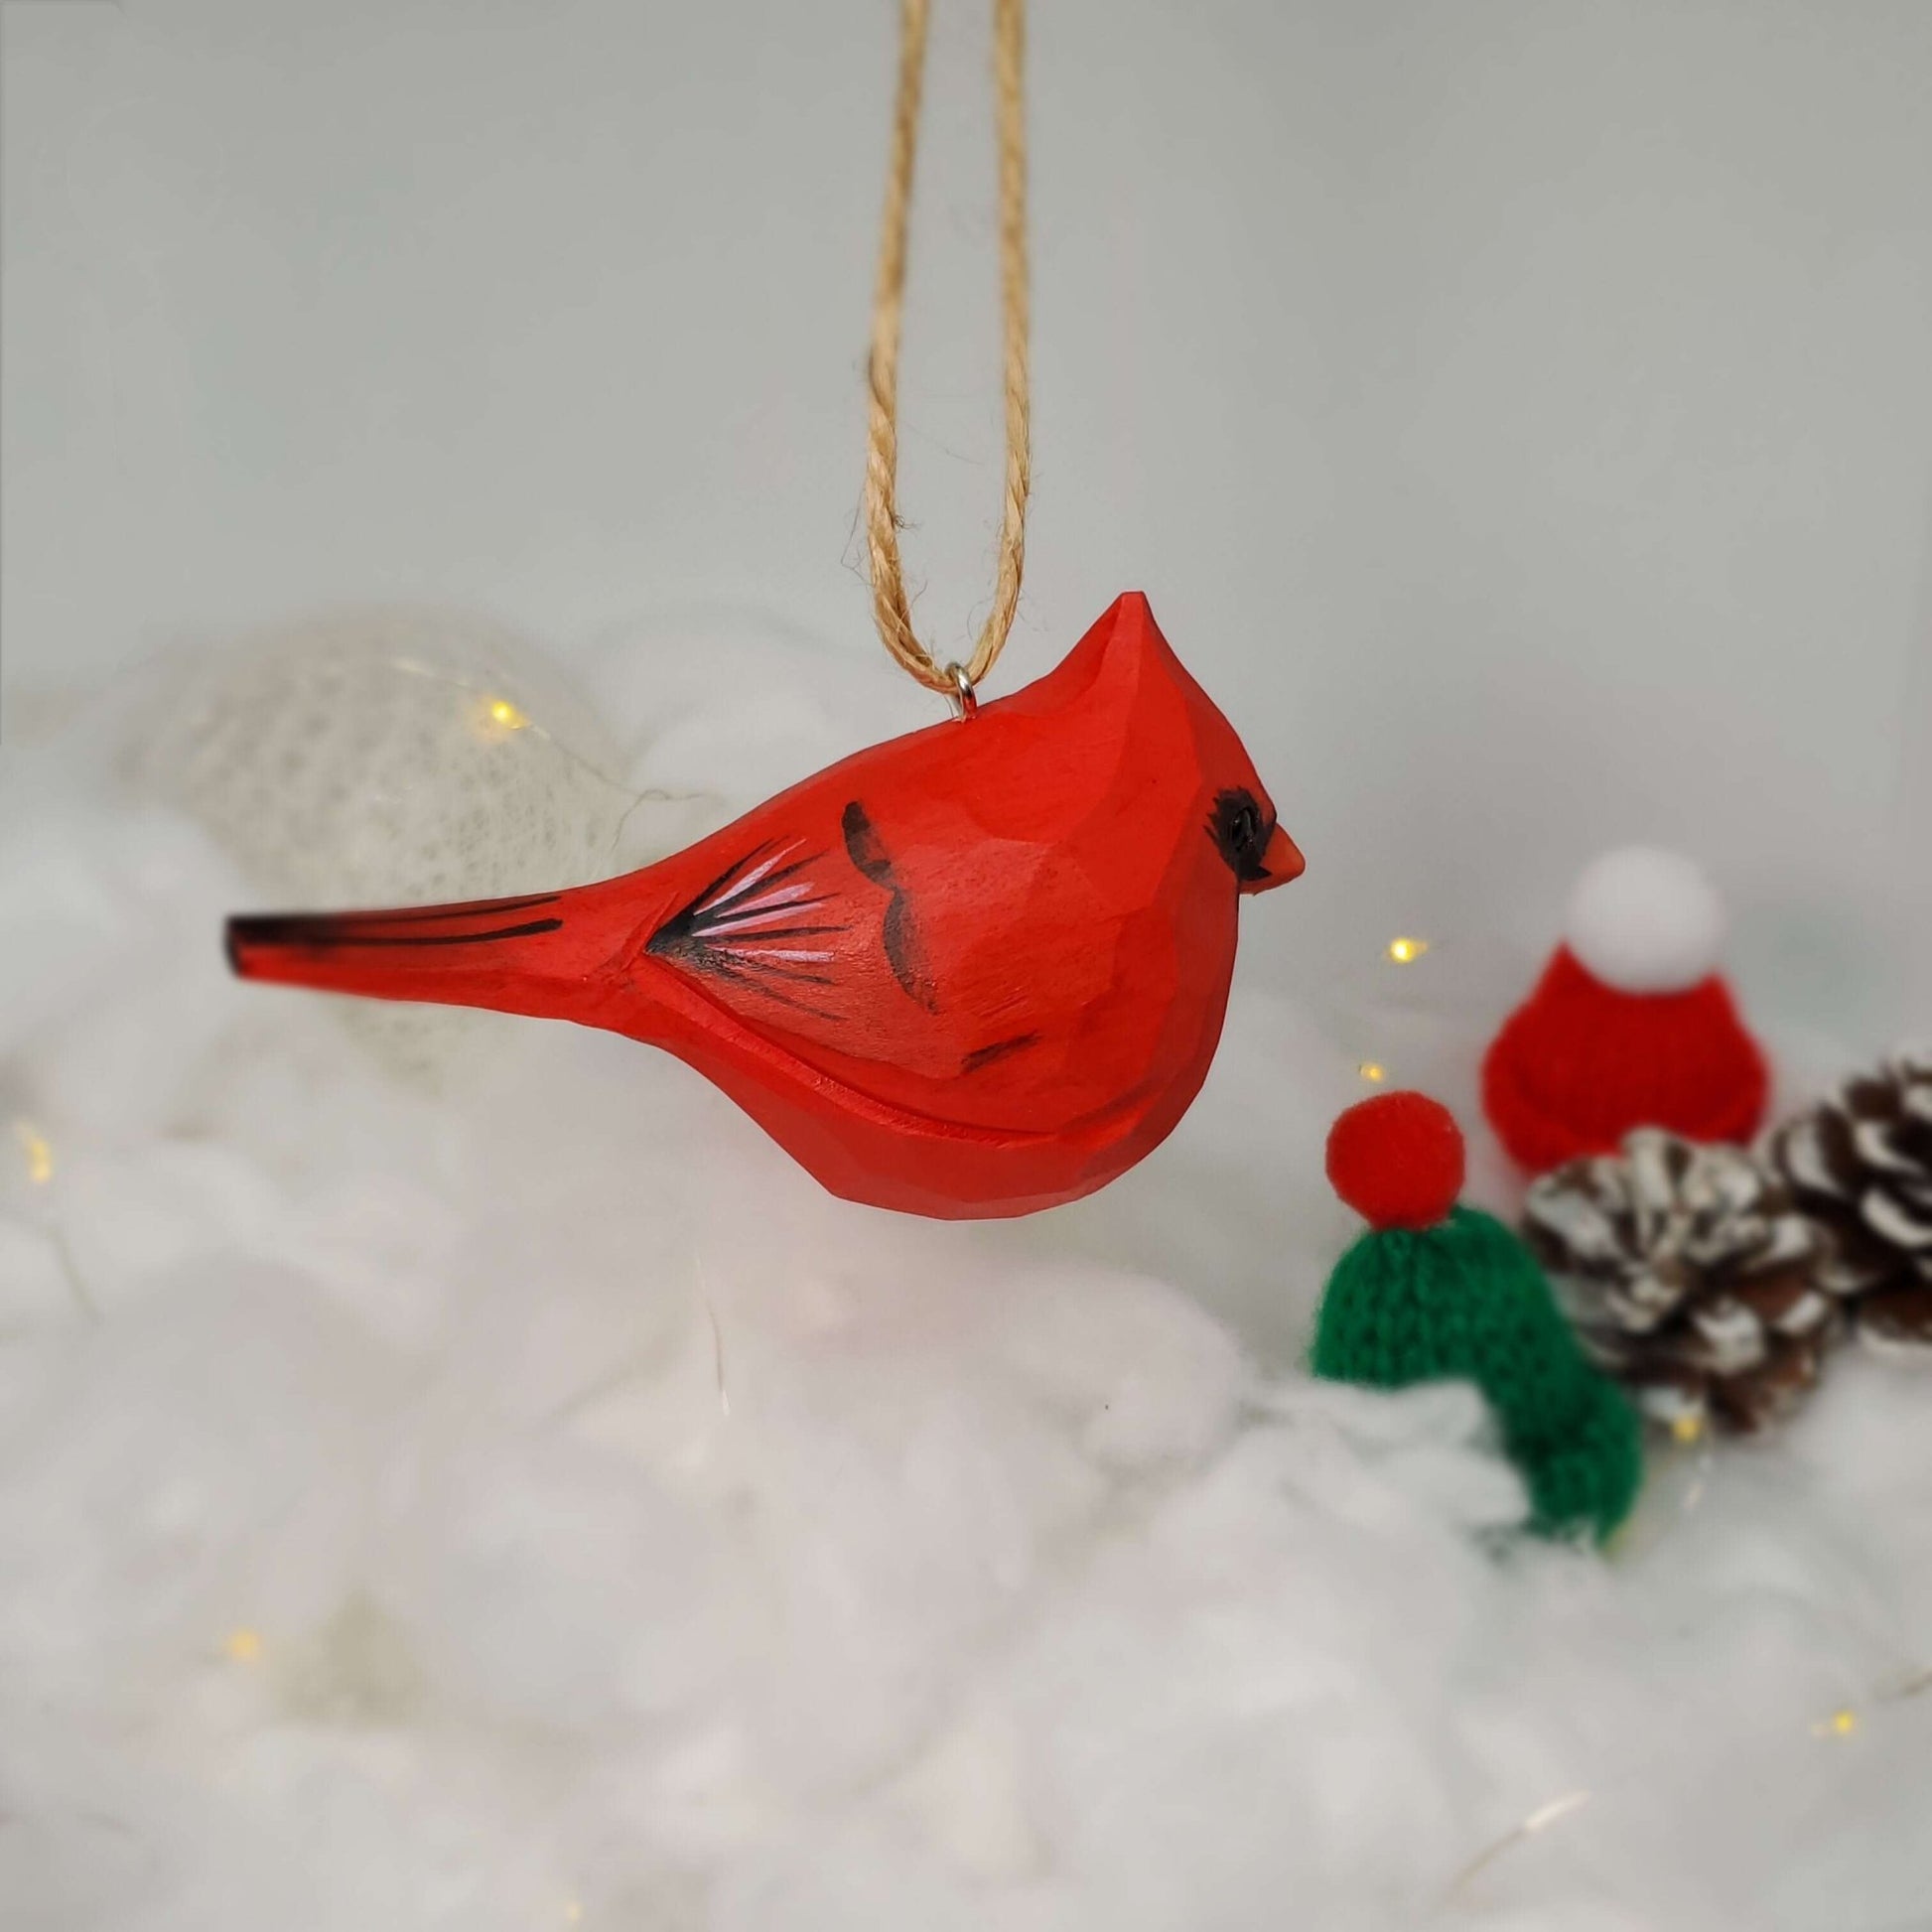 Northern Cardinal Male Ornaments - Wooden Islands